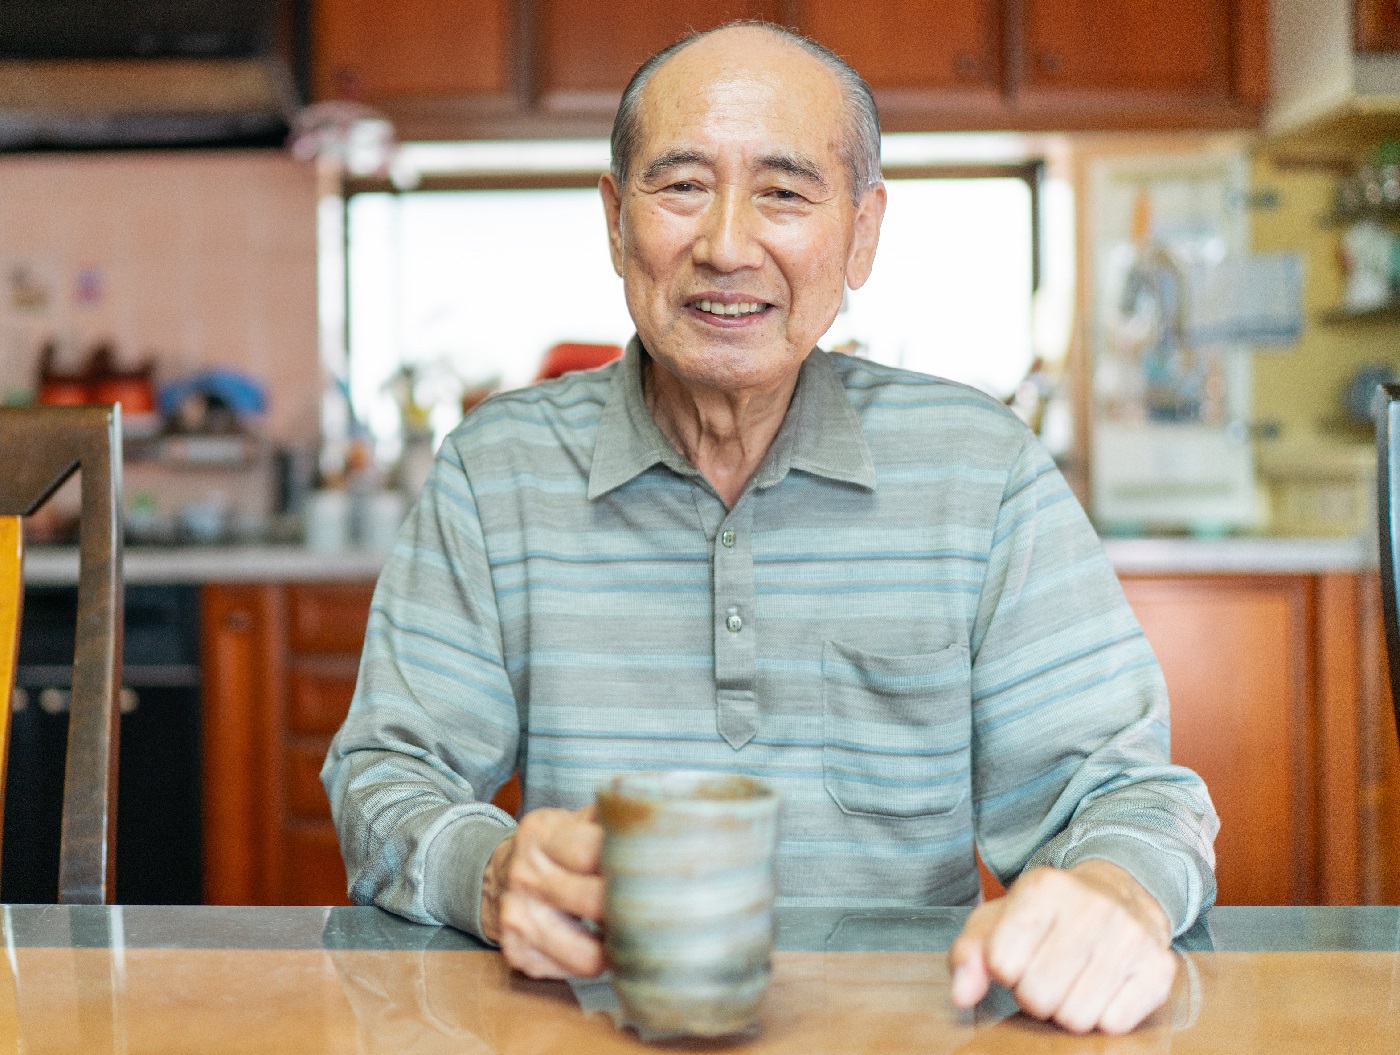 Portrait of happy senior man at home in the kitchen, holding a coffee mug